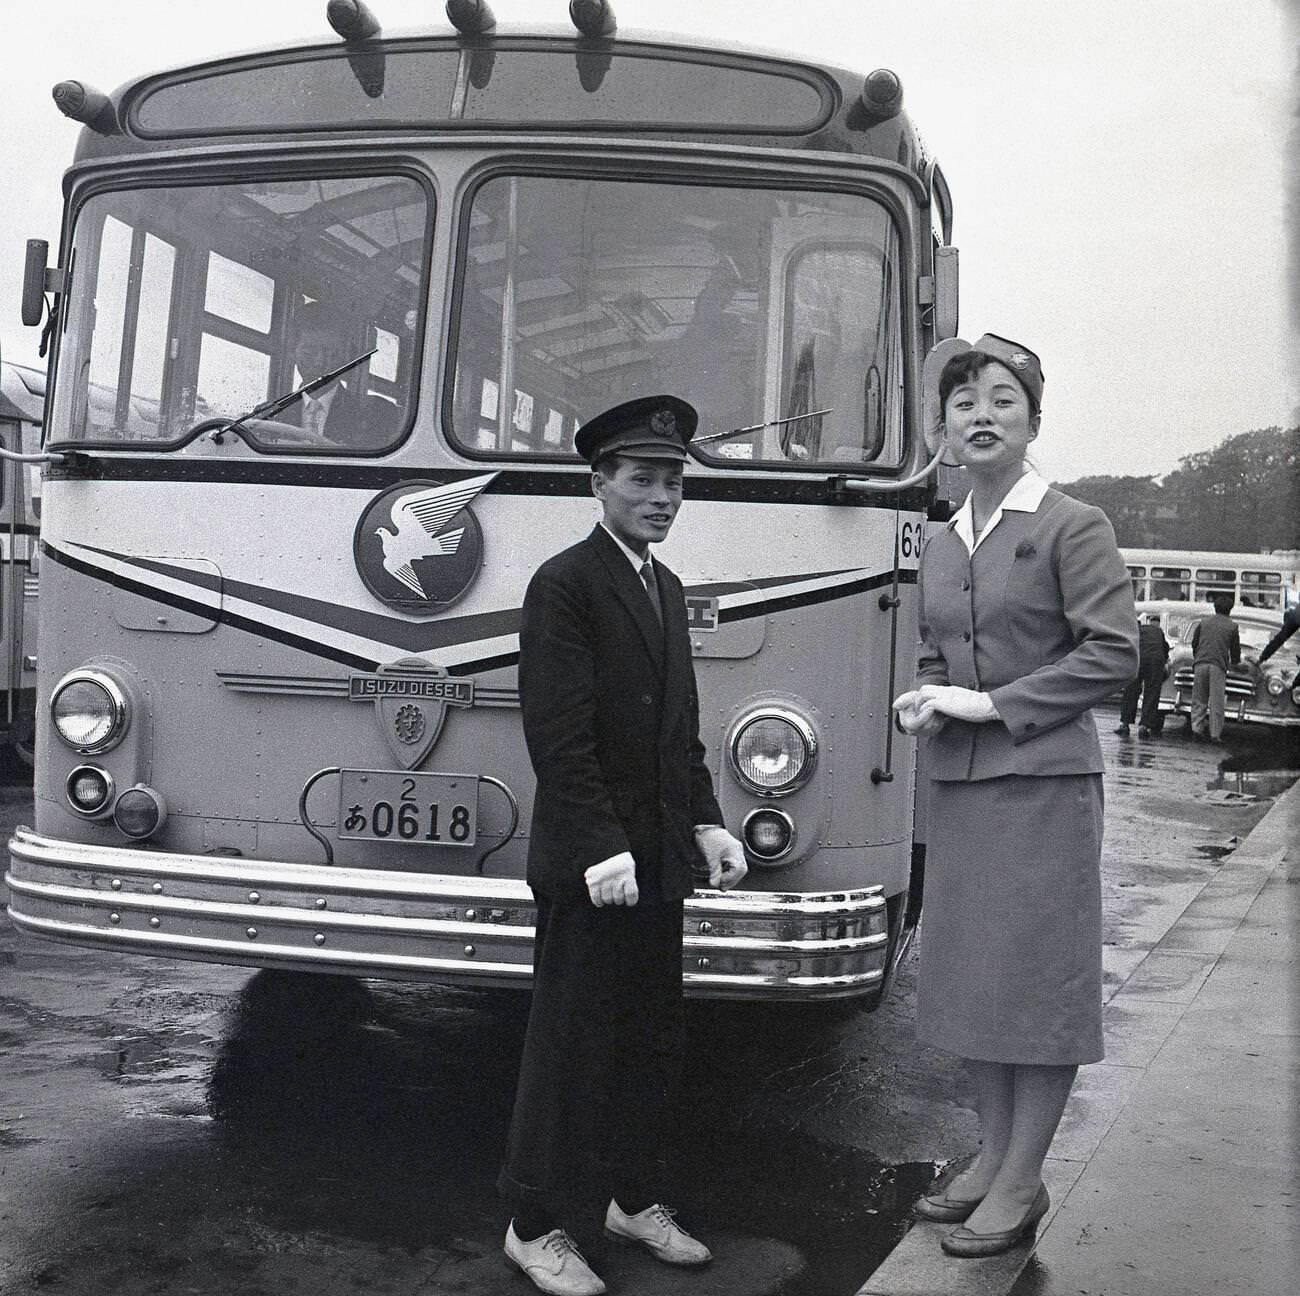 Uniformed male and female guides stand outside a parked up Isuzu tourist bus, 1950s.